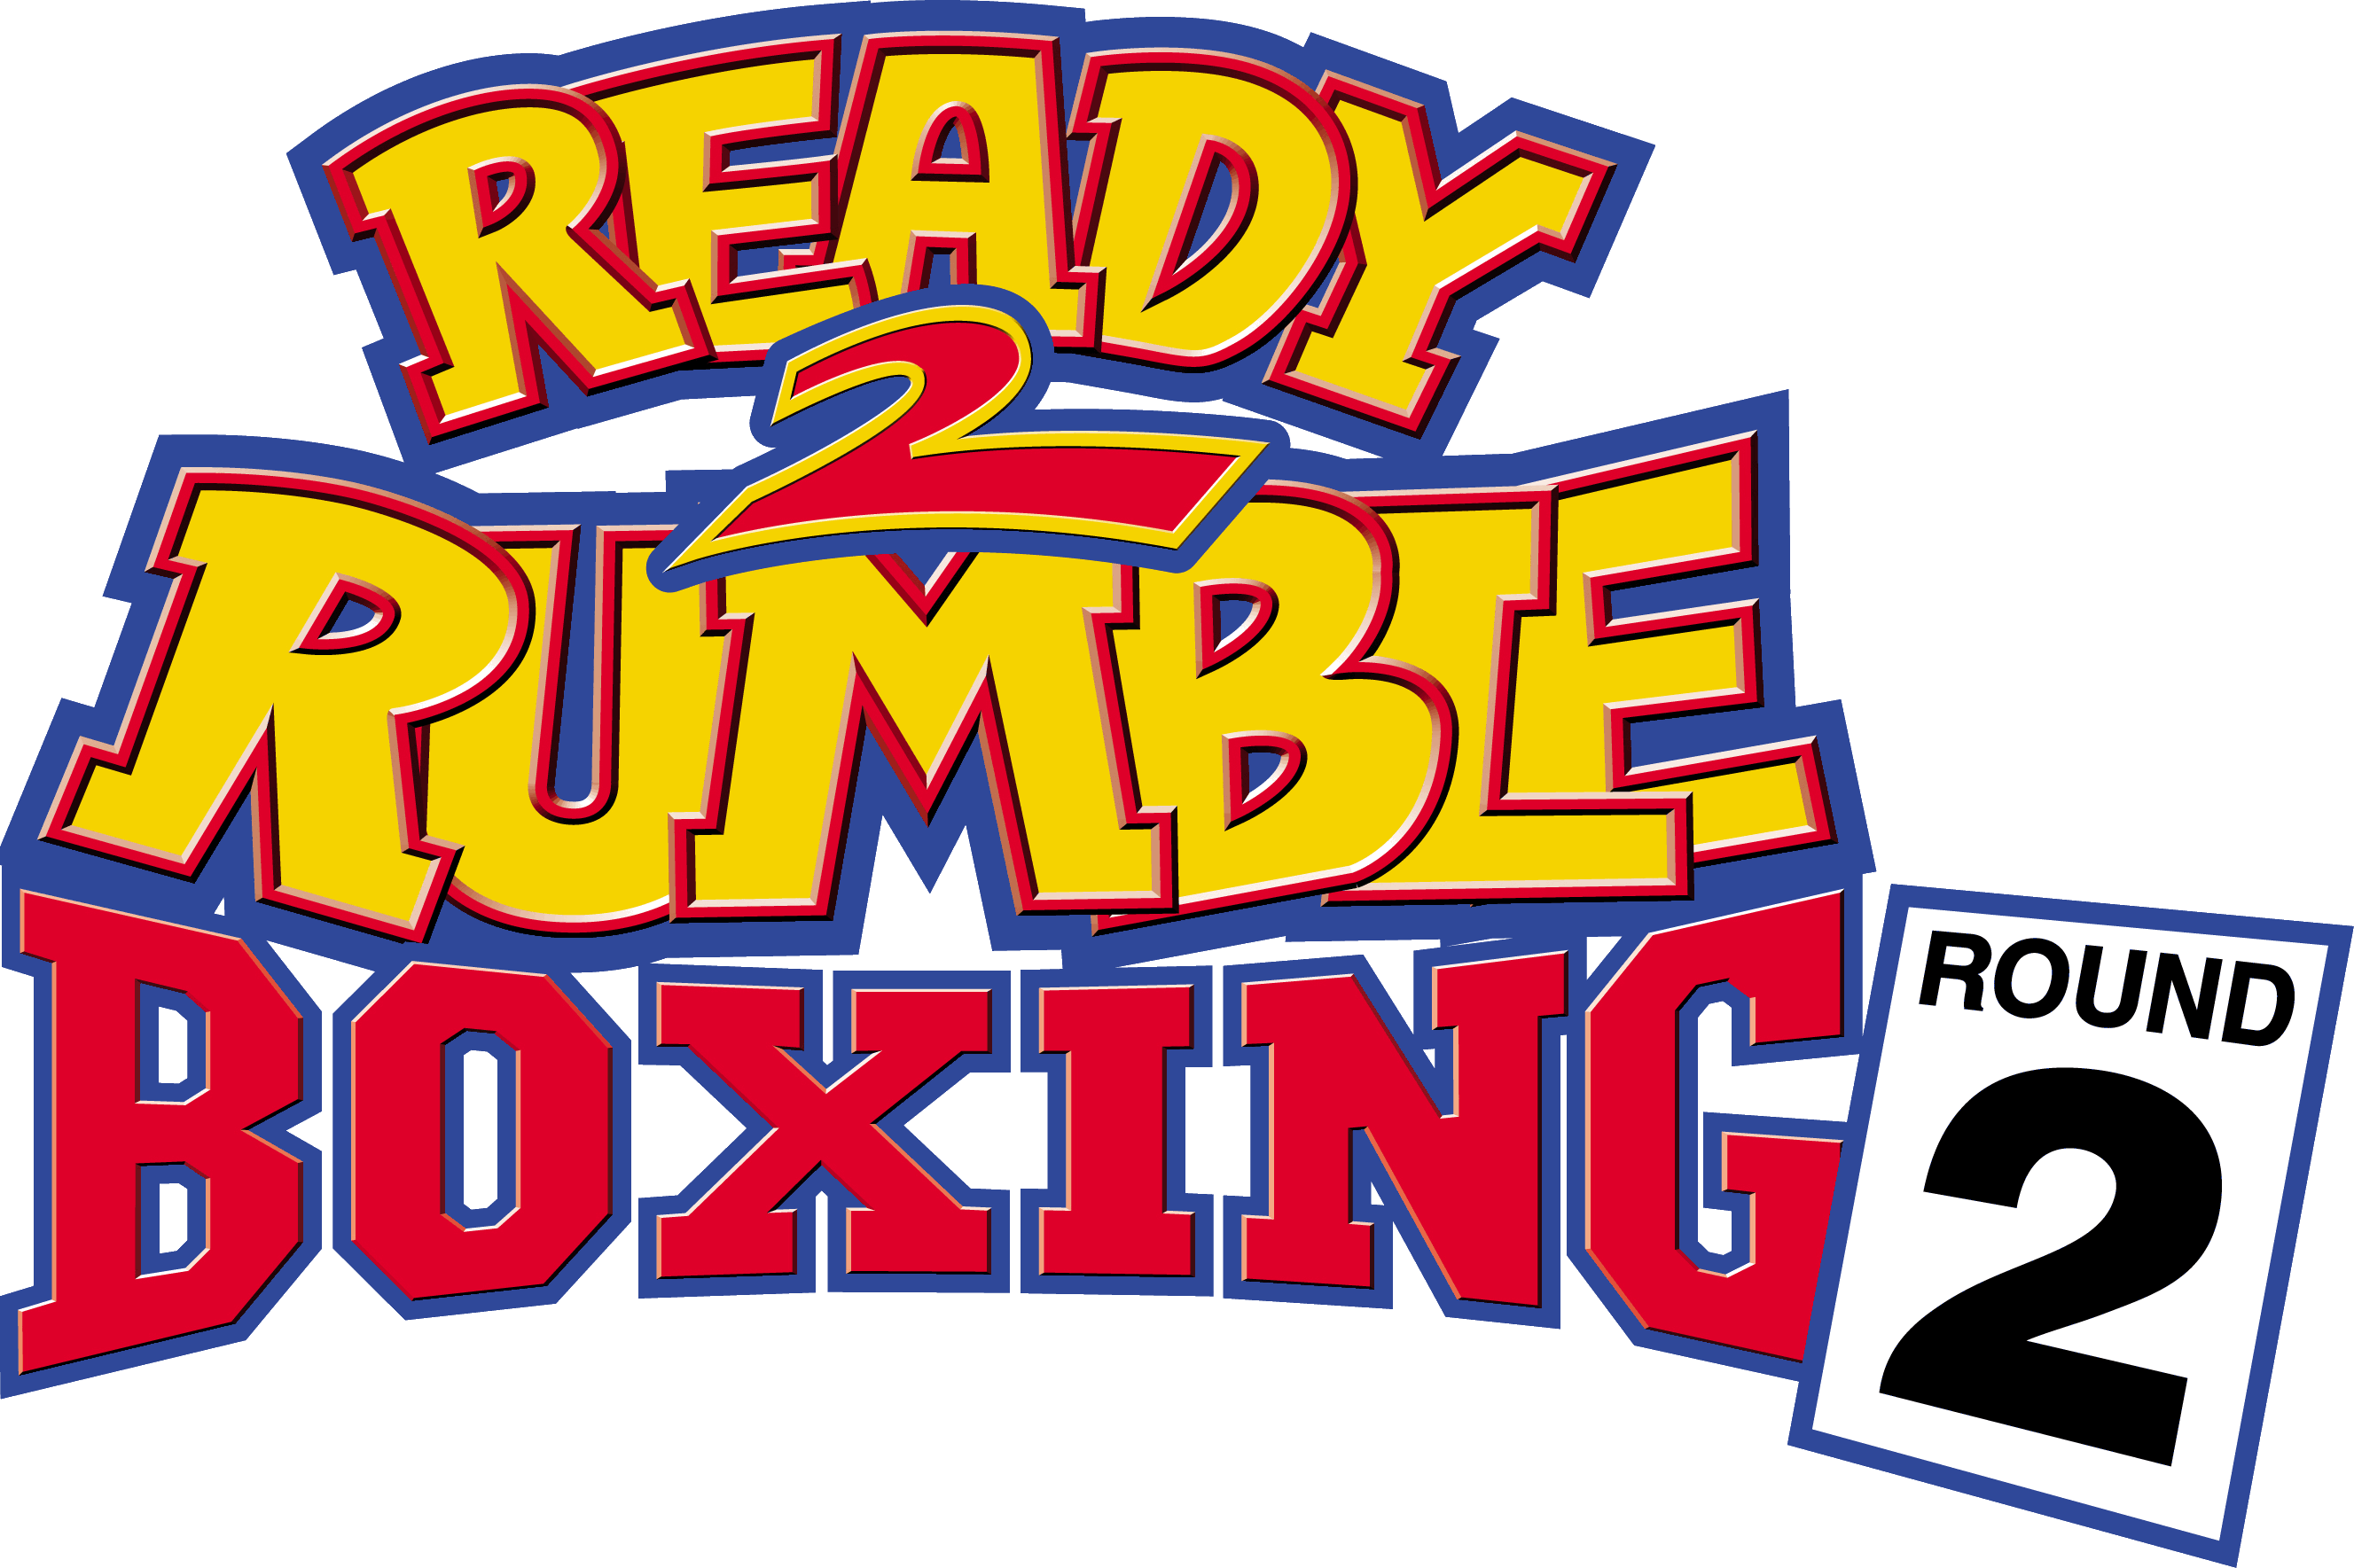 Dash round 2. Ready 2 Rumble Boxing: Round 2 ps2. Ready 2 Rumble Boxing. Ready 2 Rumble Boxing ps1. Ready 2 Rumble Boxing Round 2 ps1 русская psxplanet.